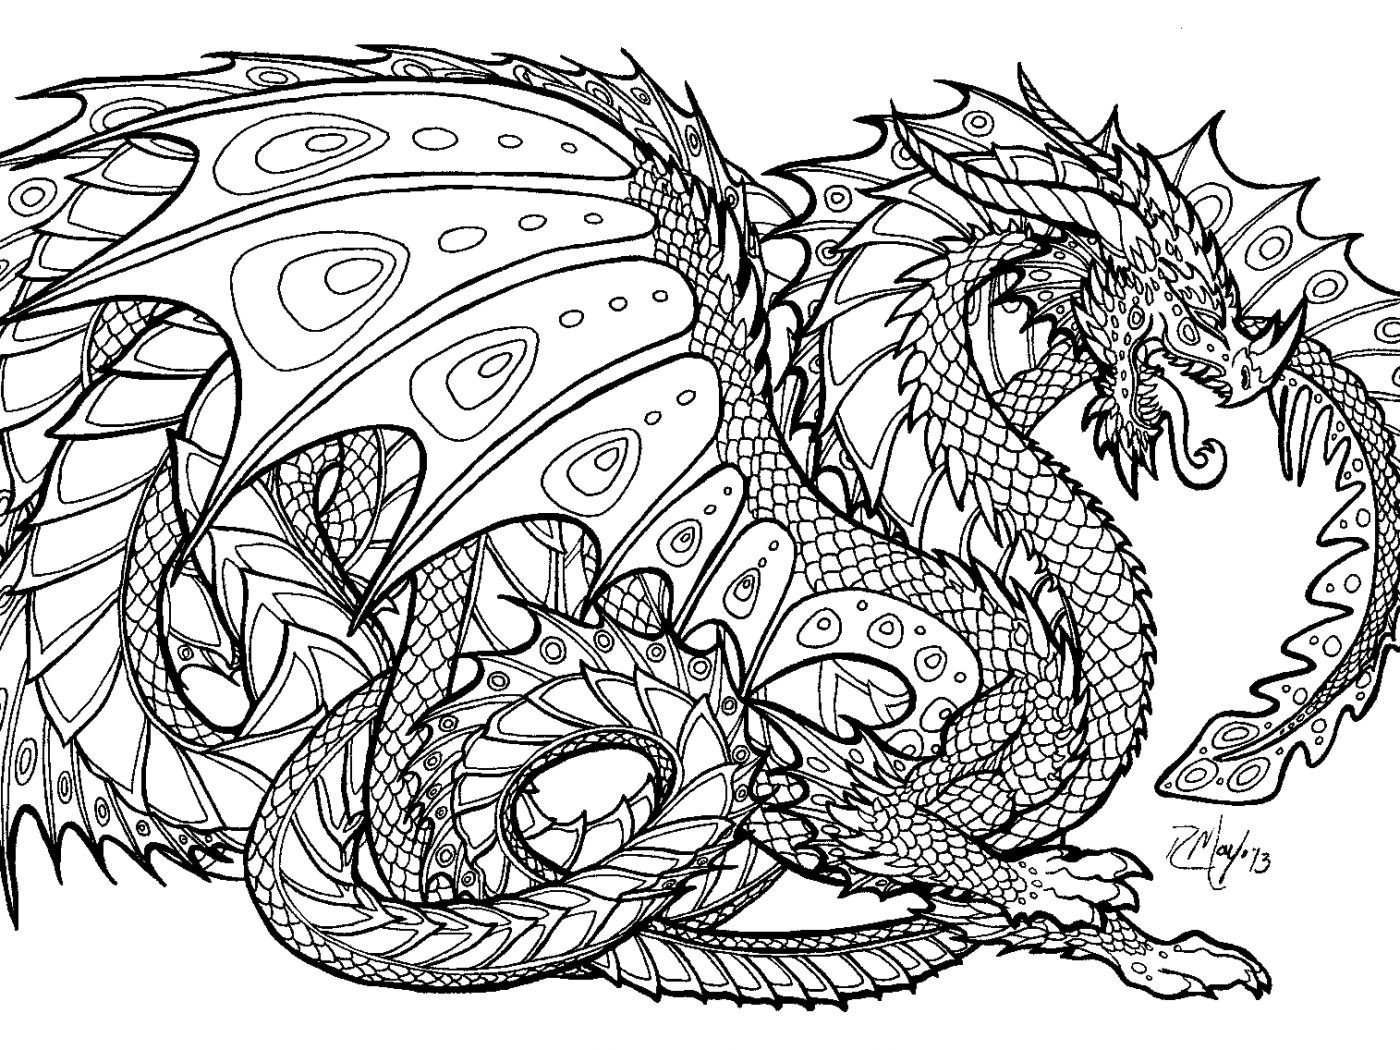 Adult Coloring Pages Coloring Ideas Hard Adult Coloring Pages New Animals For Adults